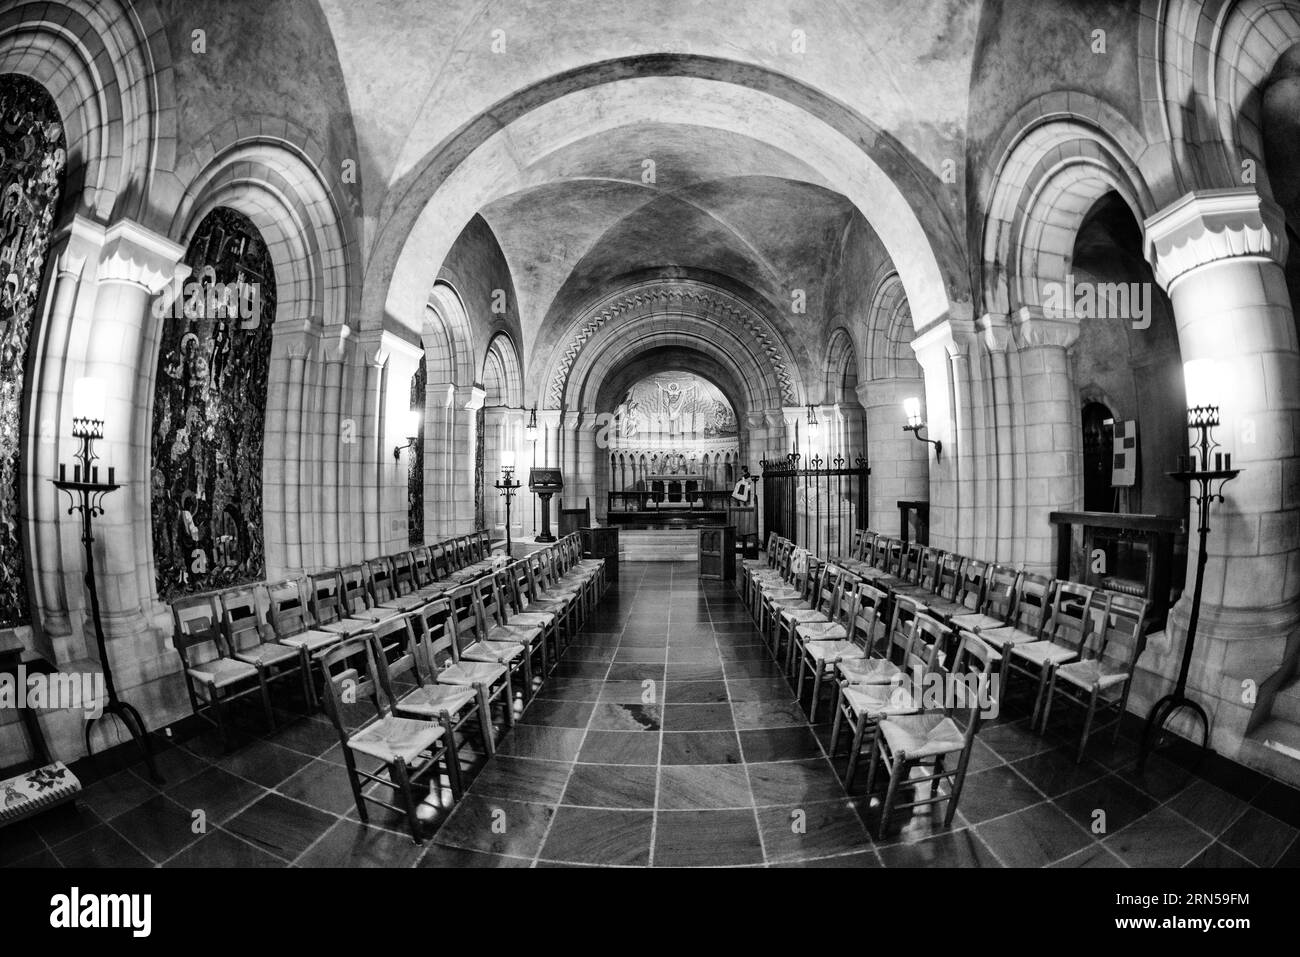 WASHINGTON, DC - The Chapel of the Resurrection is in the crypt of Washington National Cathedral. Its walls feature several large panels of colorful t Stock Photo